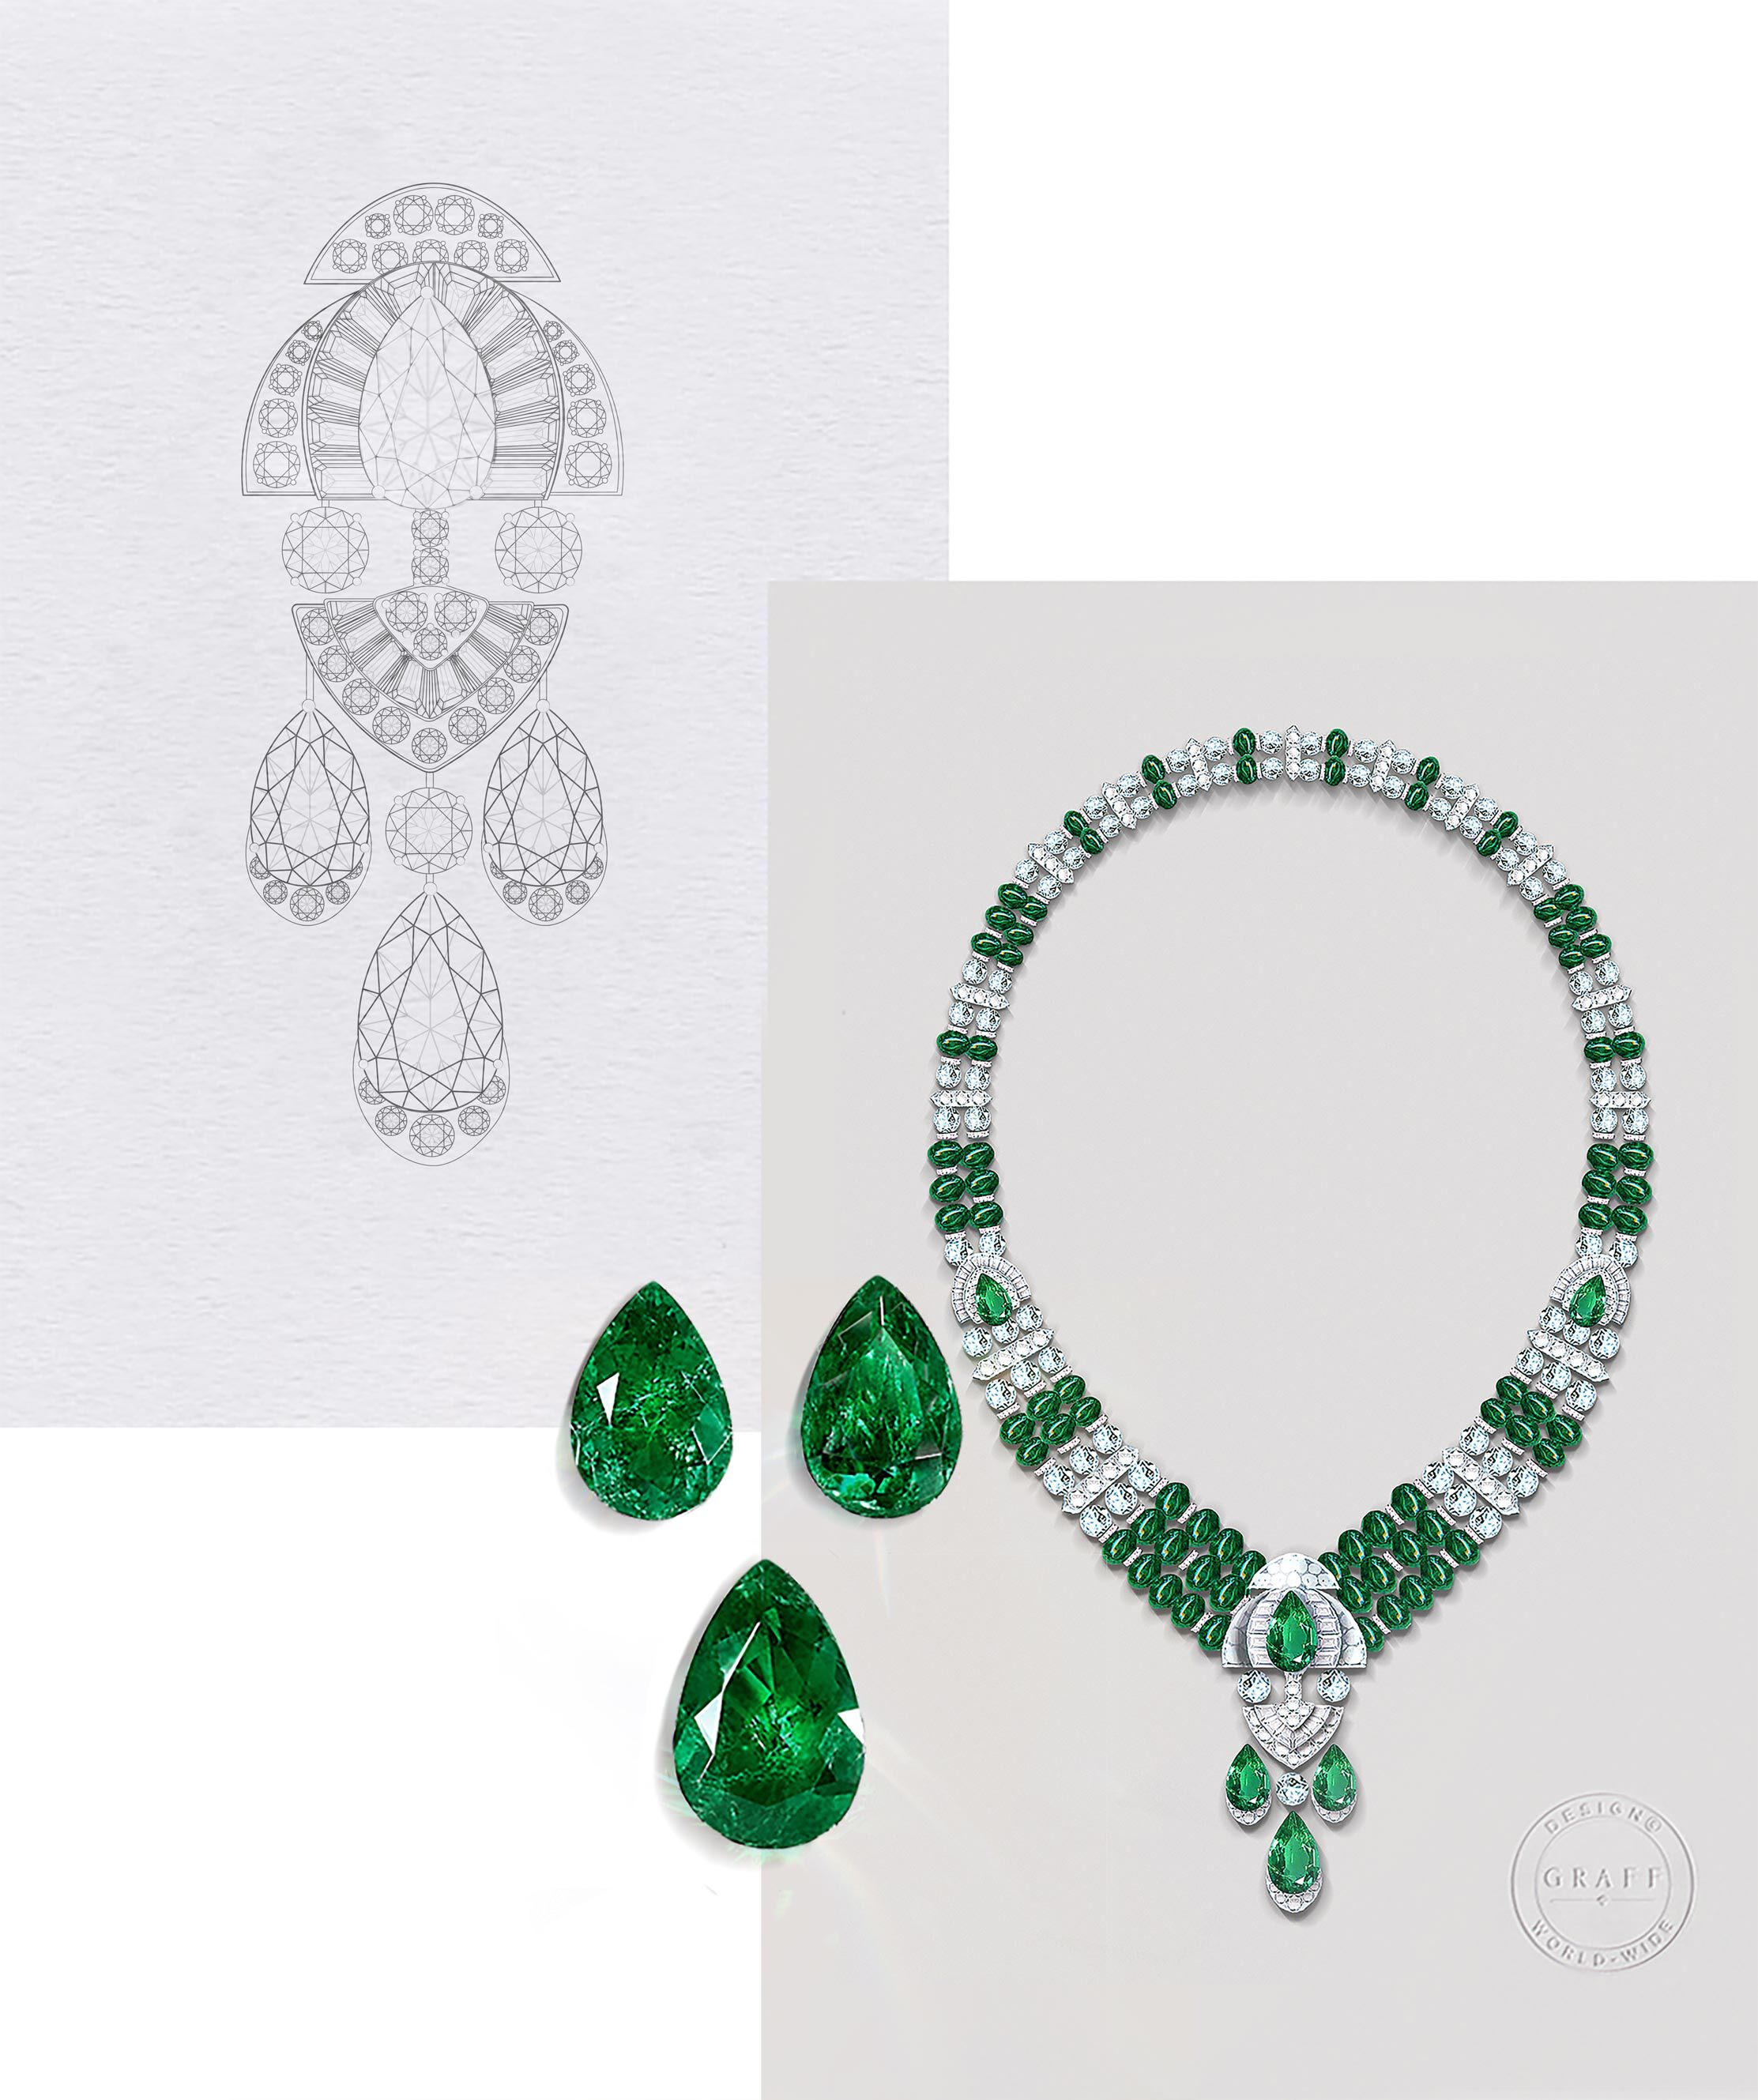 Drawing and painting of Graff High Jewellery Emerald and diamond necklace